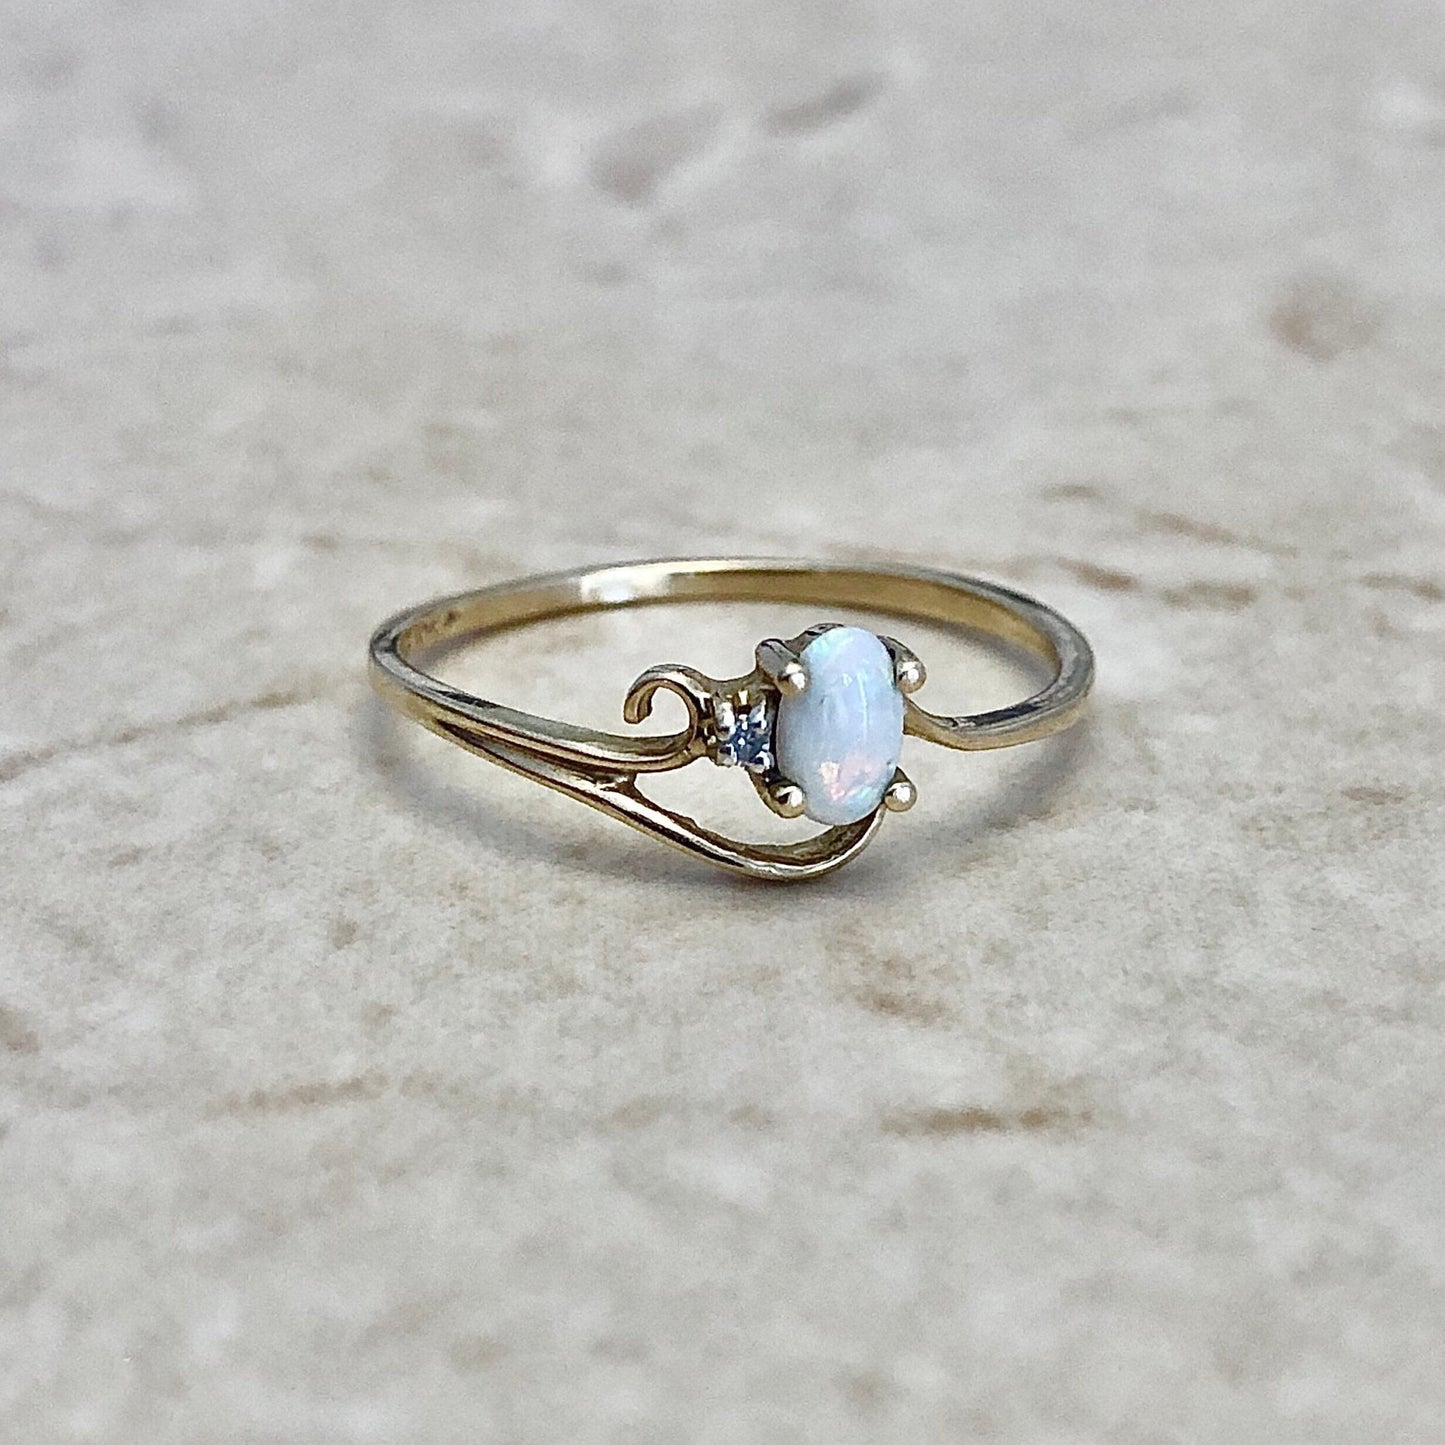 Vintage Natural Opal And Diamond Ring - 10 Karat Yellow Gold - October Birthstone - Birthday Gift - Size 8